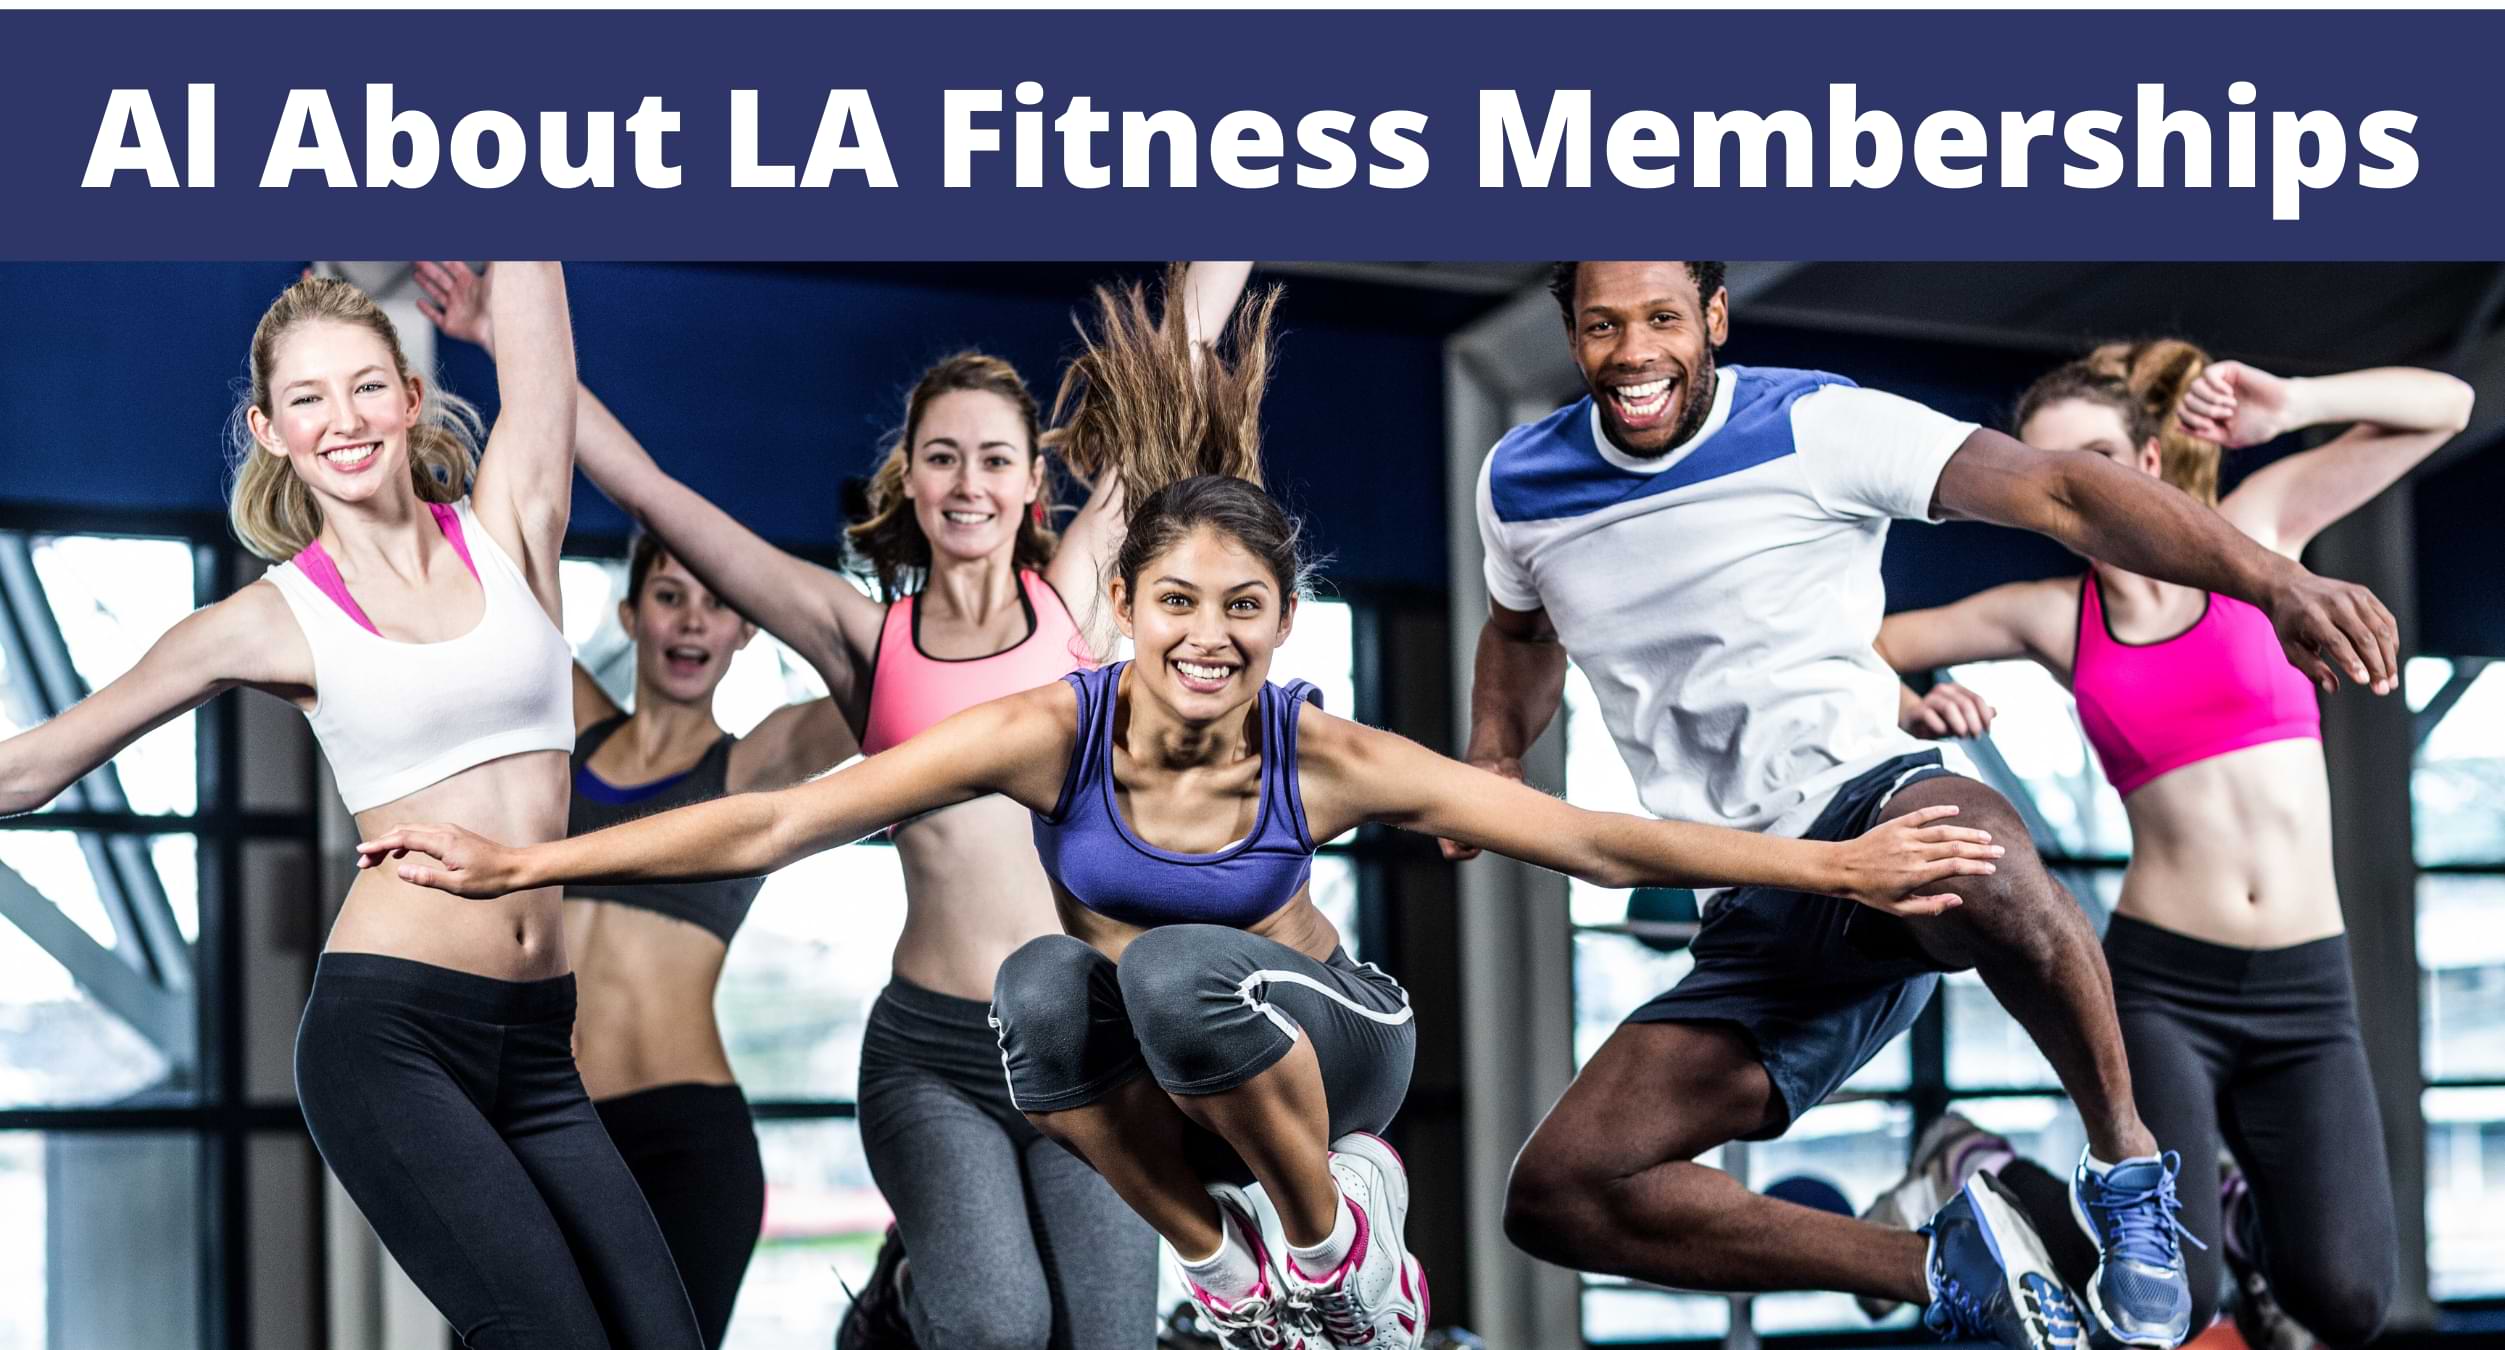 All About LA Fitness Memberships